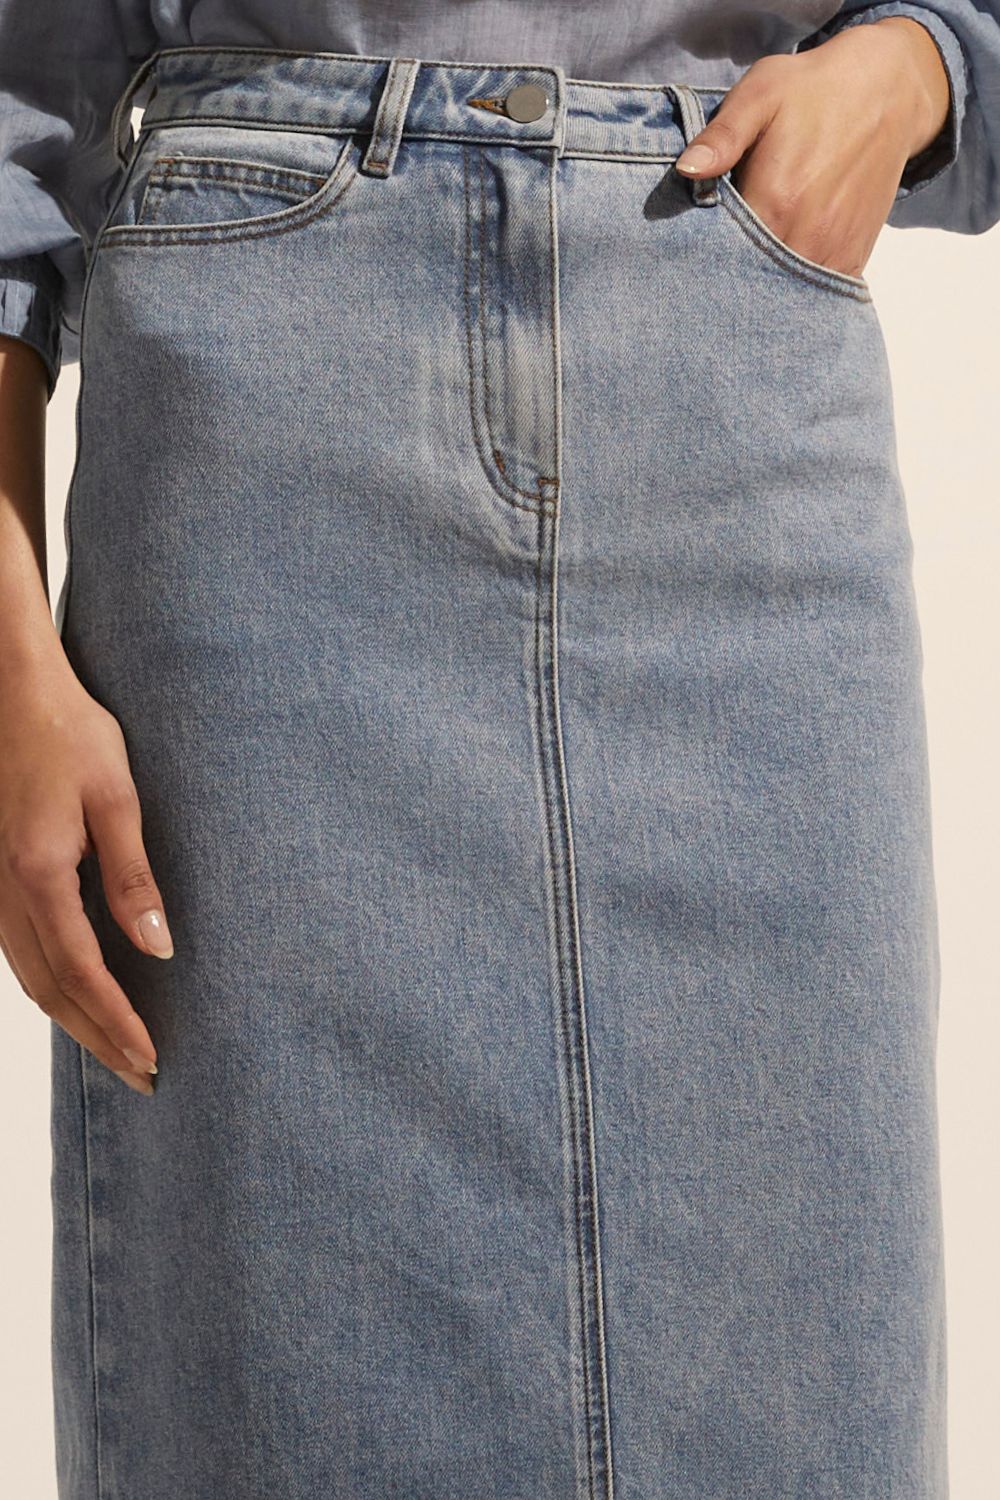 blue, midi skirt, denim midi skirt, denim skirt, side and back pockets, detail image